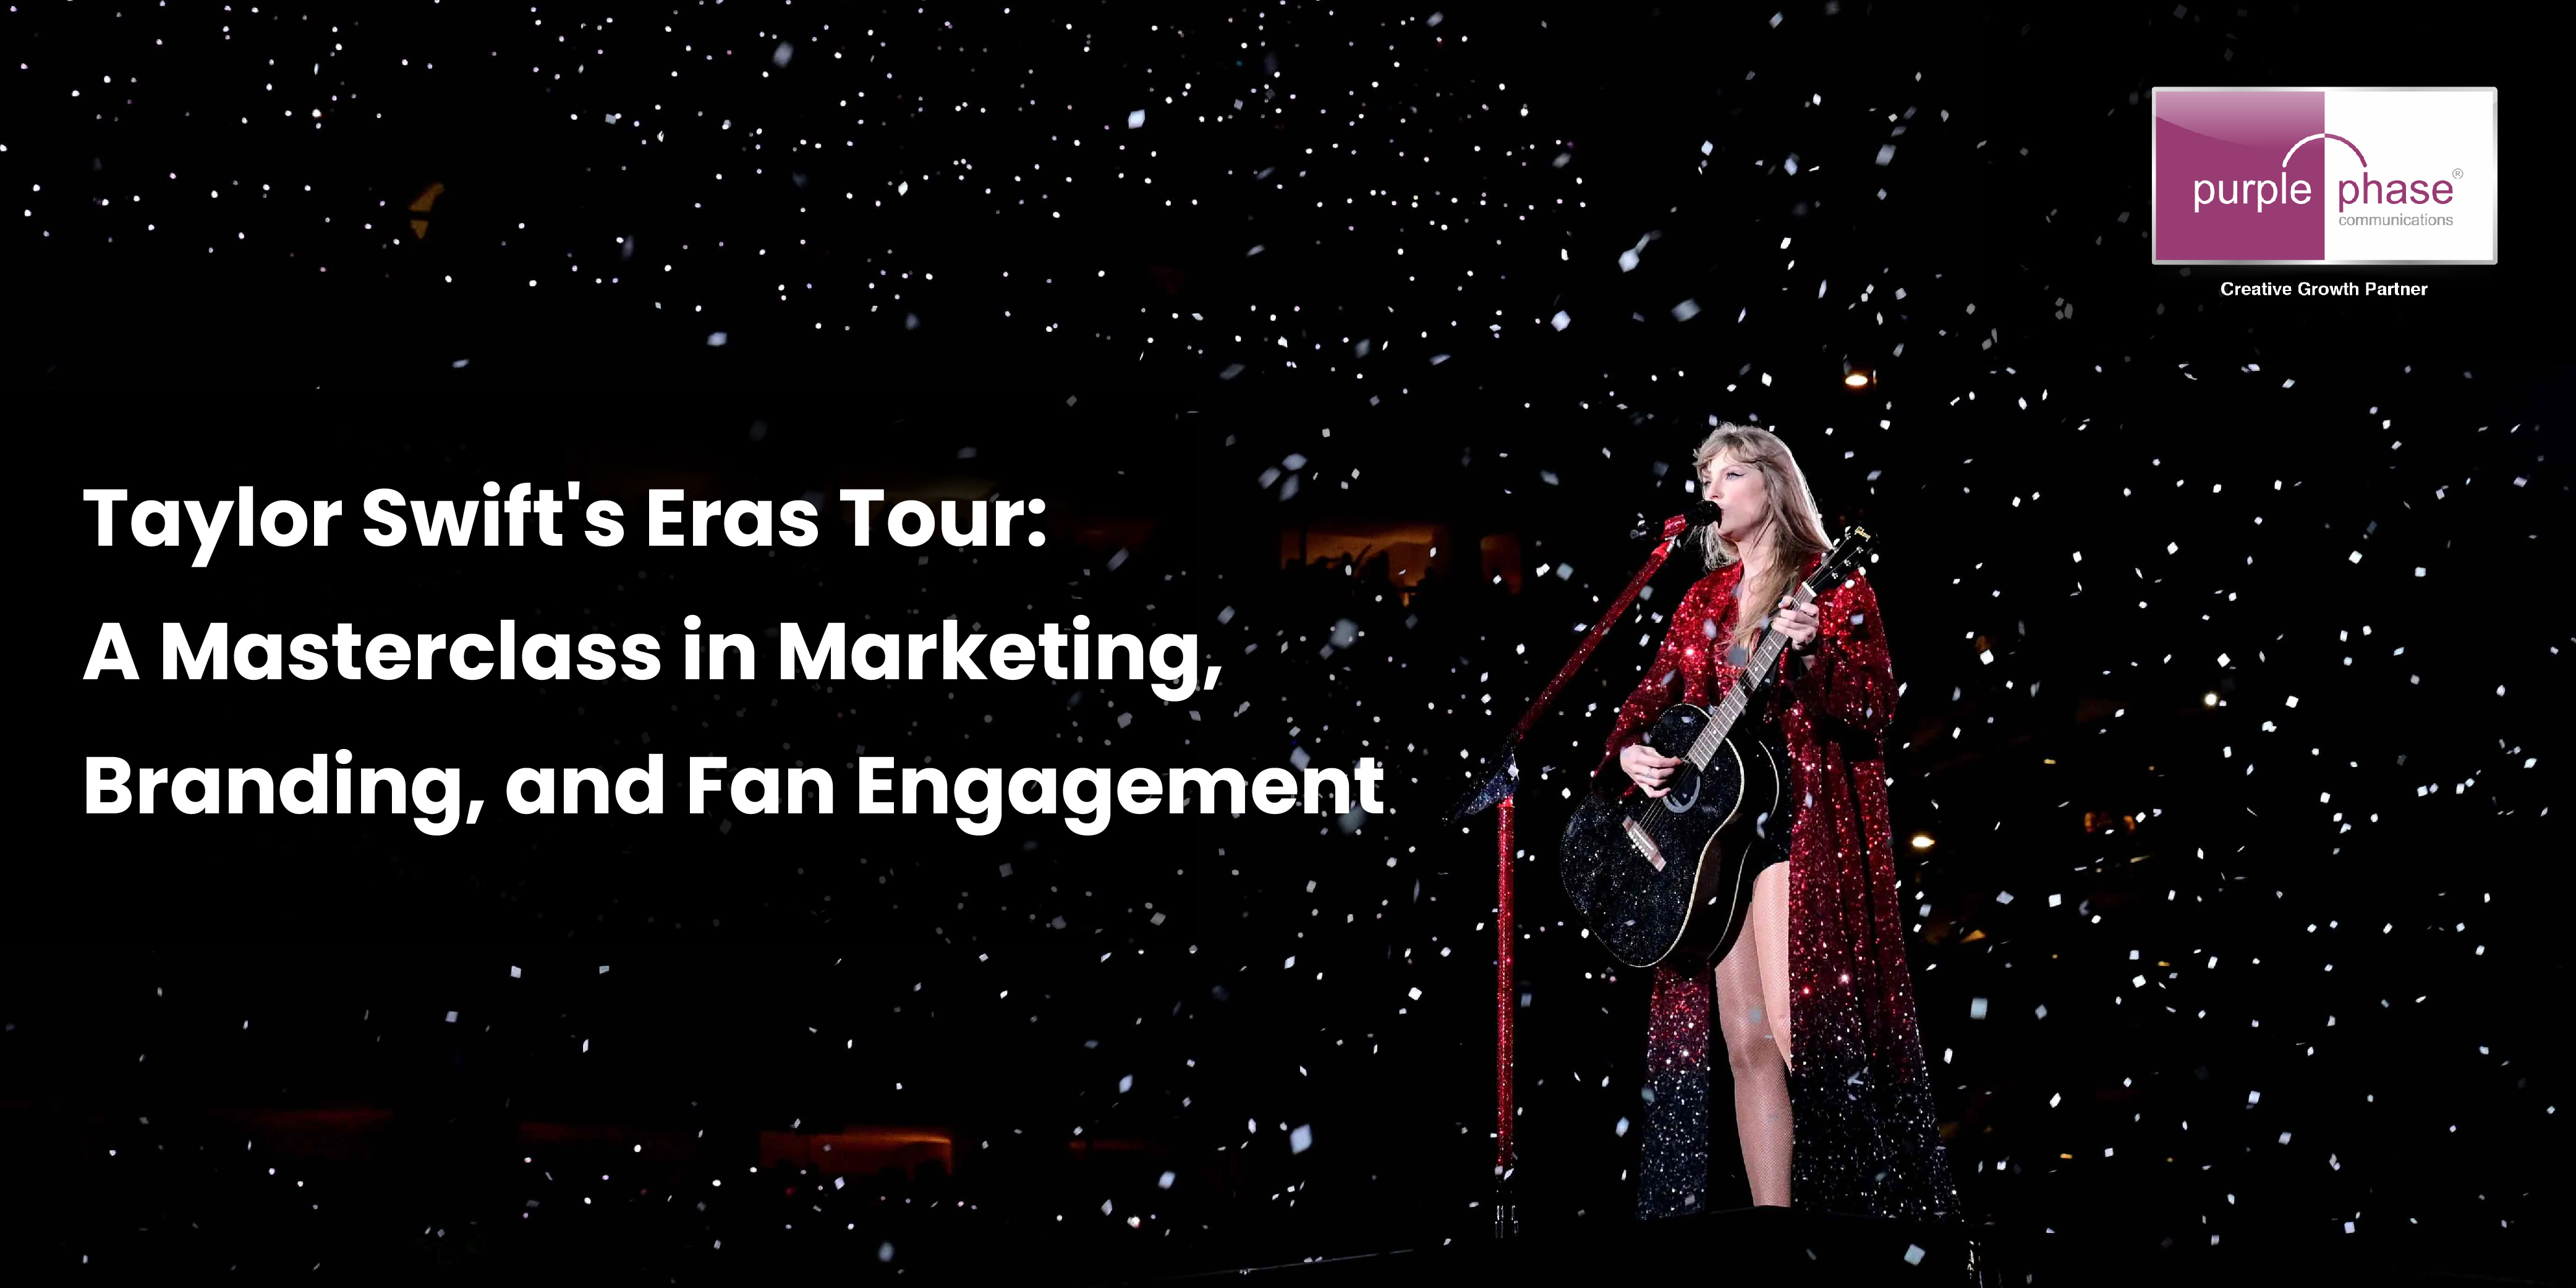 Taylor Swift's Eras Tour: A Masterclass in Marketing, Branding, and Fan Engagement